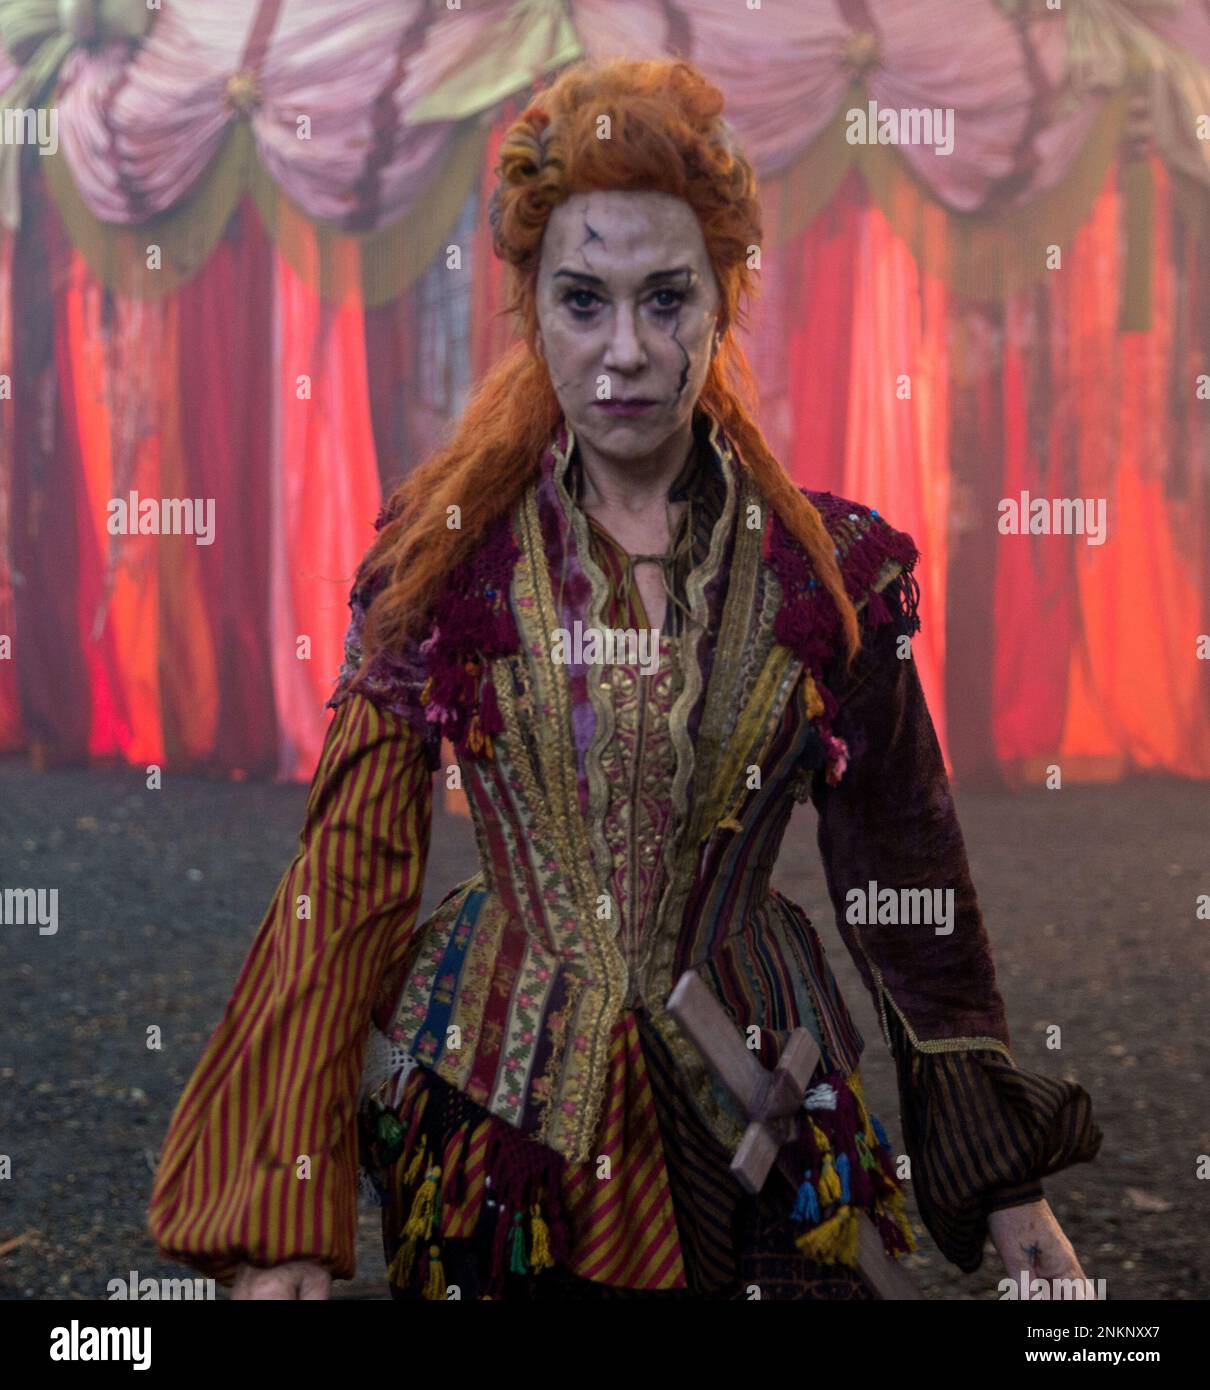 HELEN MIRREN in THE NUTCRACKER AND THE FOUR REALMS (2018), directed by JOE JOHNSTON and LASSE HALLSTROM. Credit: WALT DISNEY PICTURES / Album Stock Photo